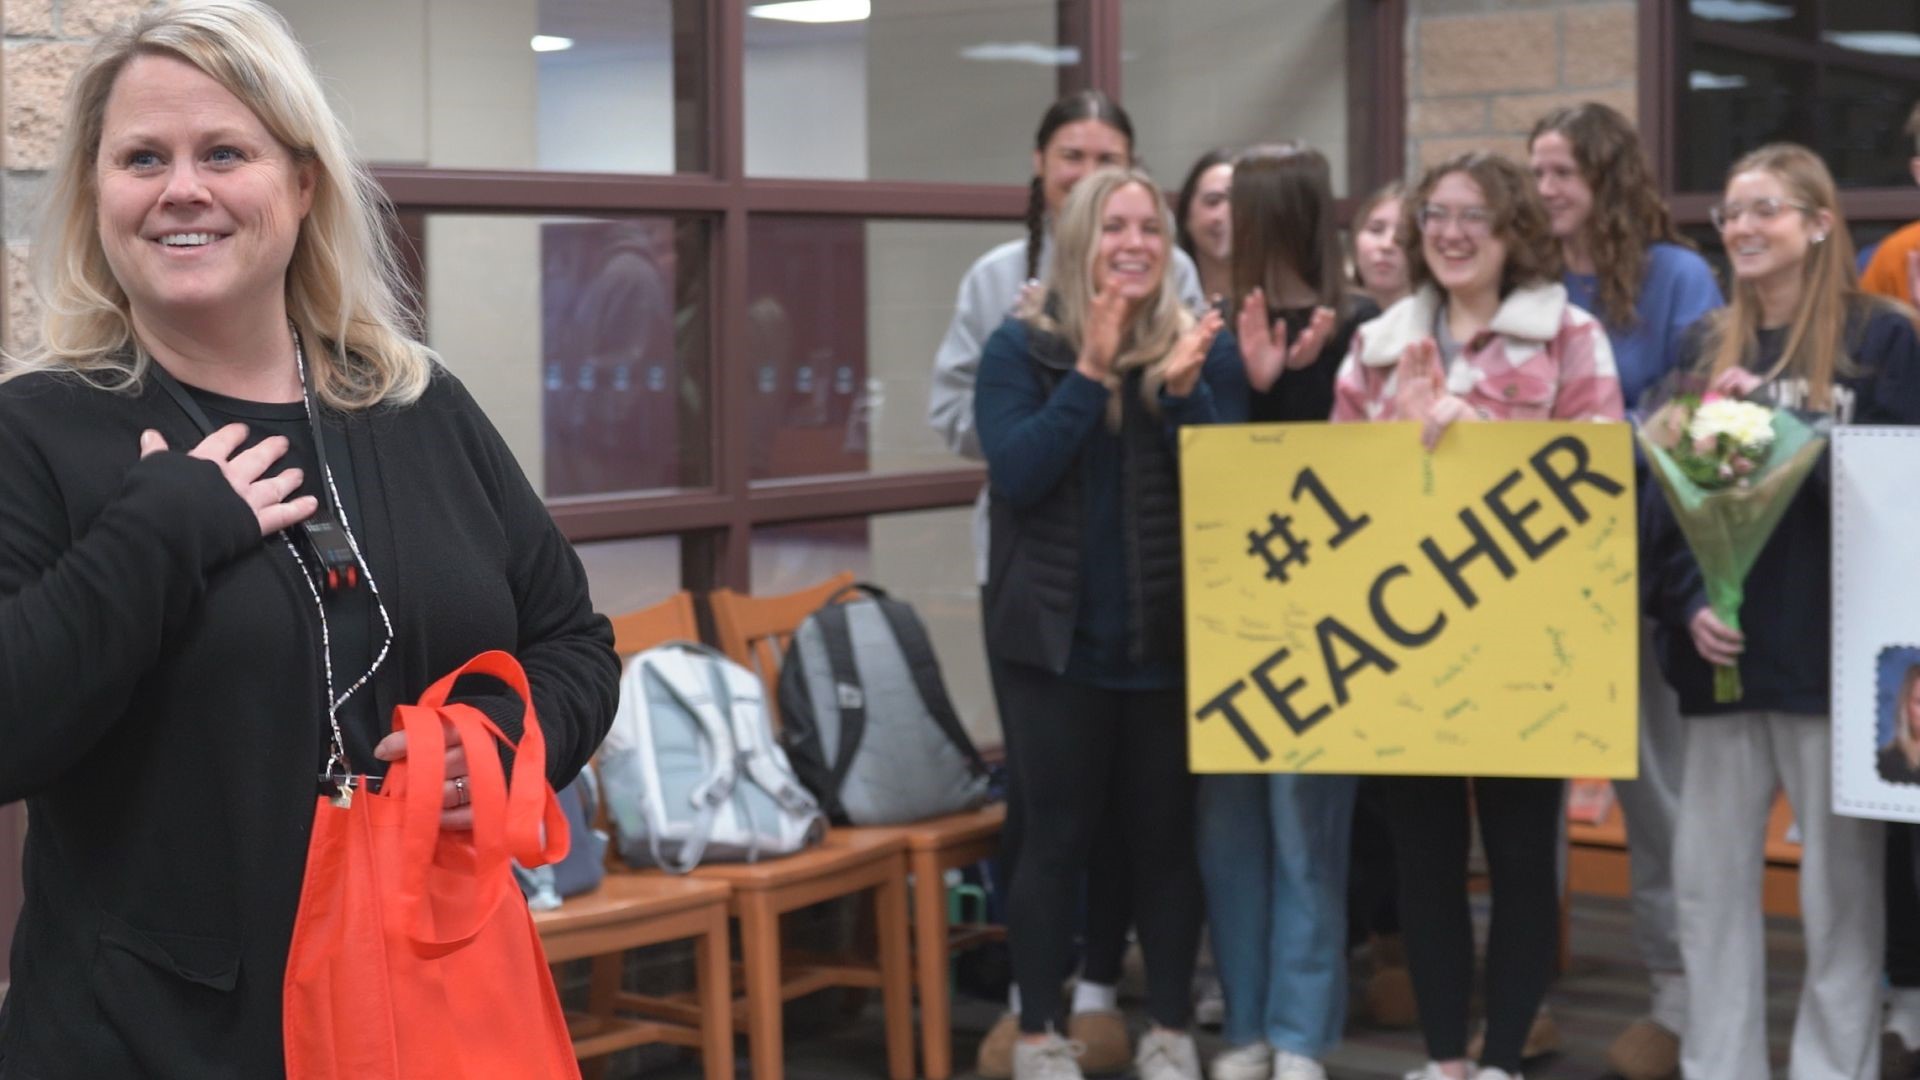 Lisa Botsford has spent her entire 22-year teaching career at Kenowa Hills High School, and says it’s a privilege to be a part of her students’ lives.